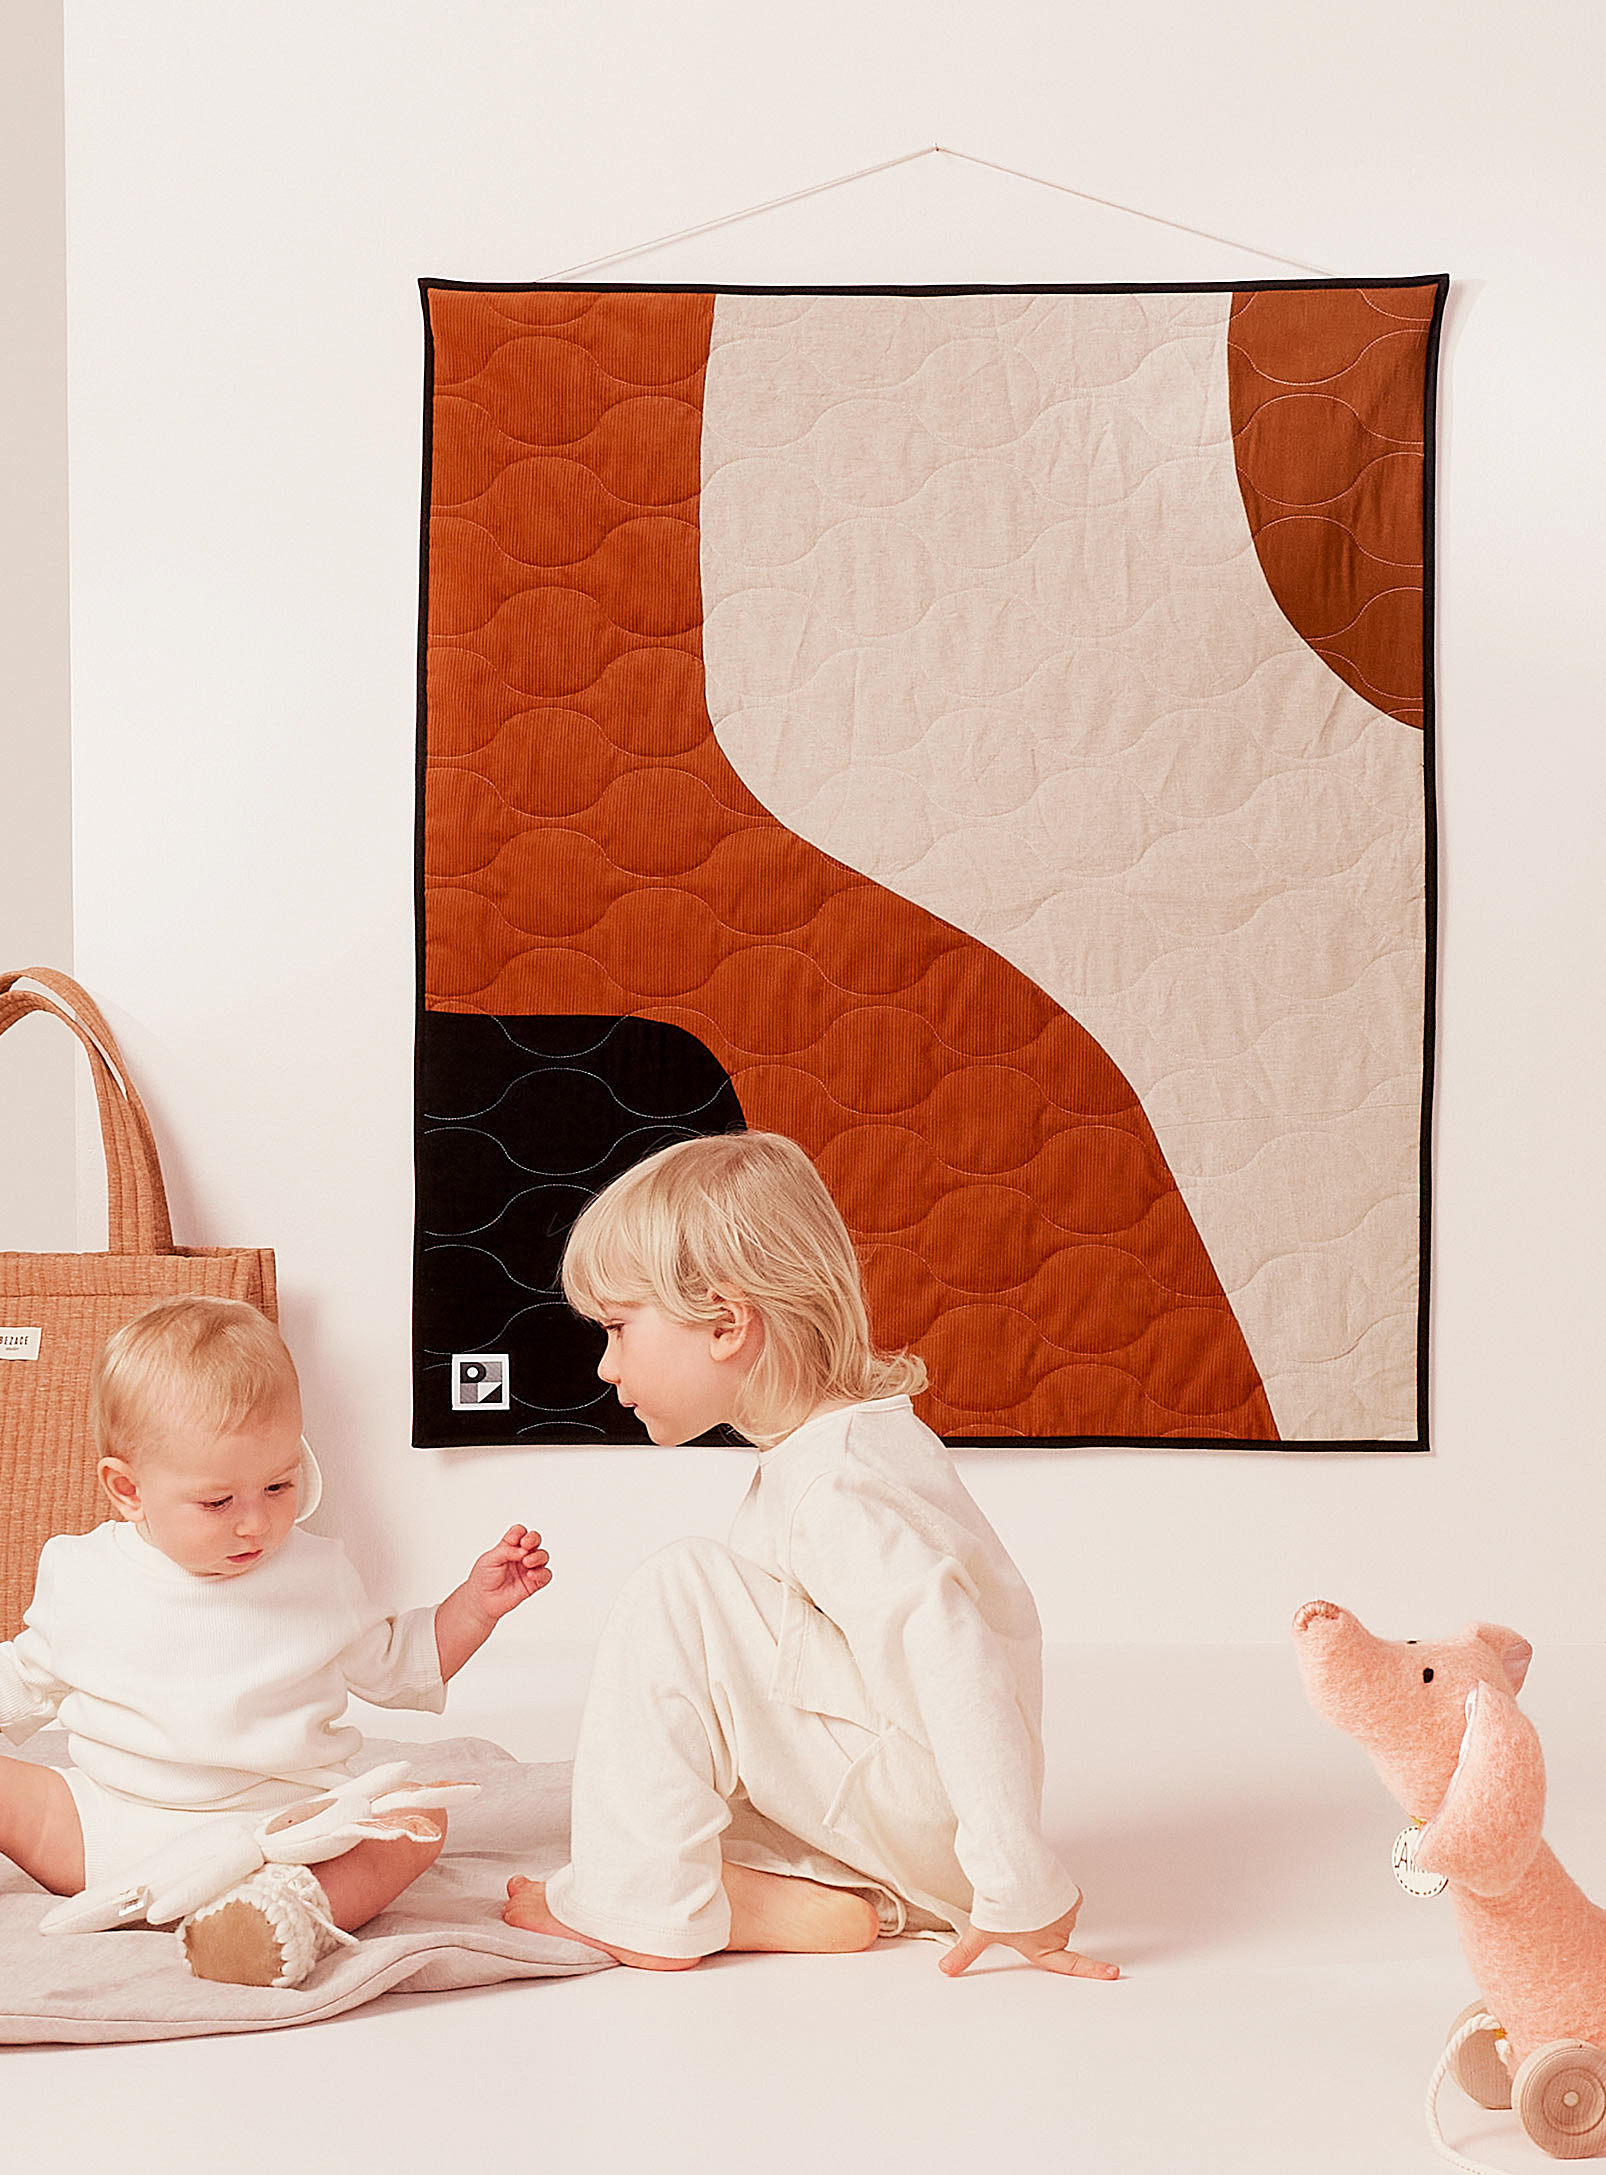 Le Point Visible Beaubien Children's Quilt Series Limited To 2 Copies In Copper